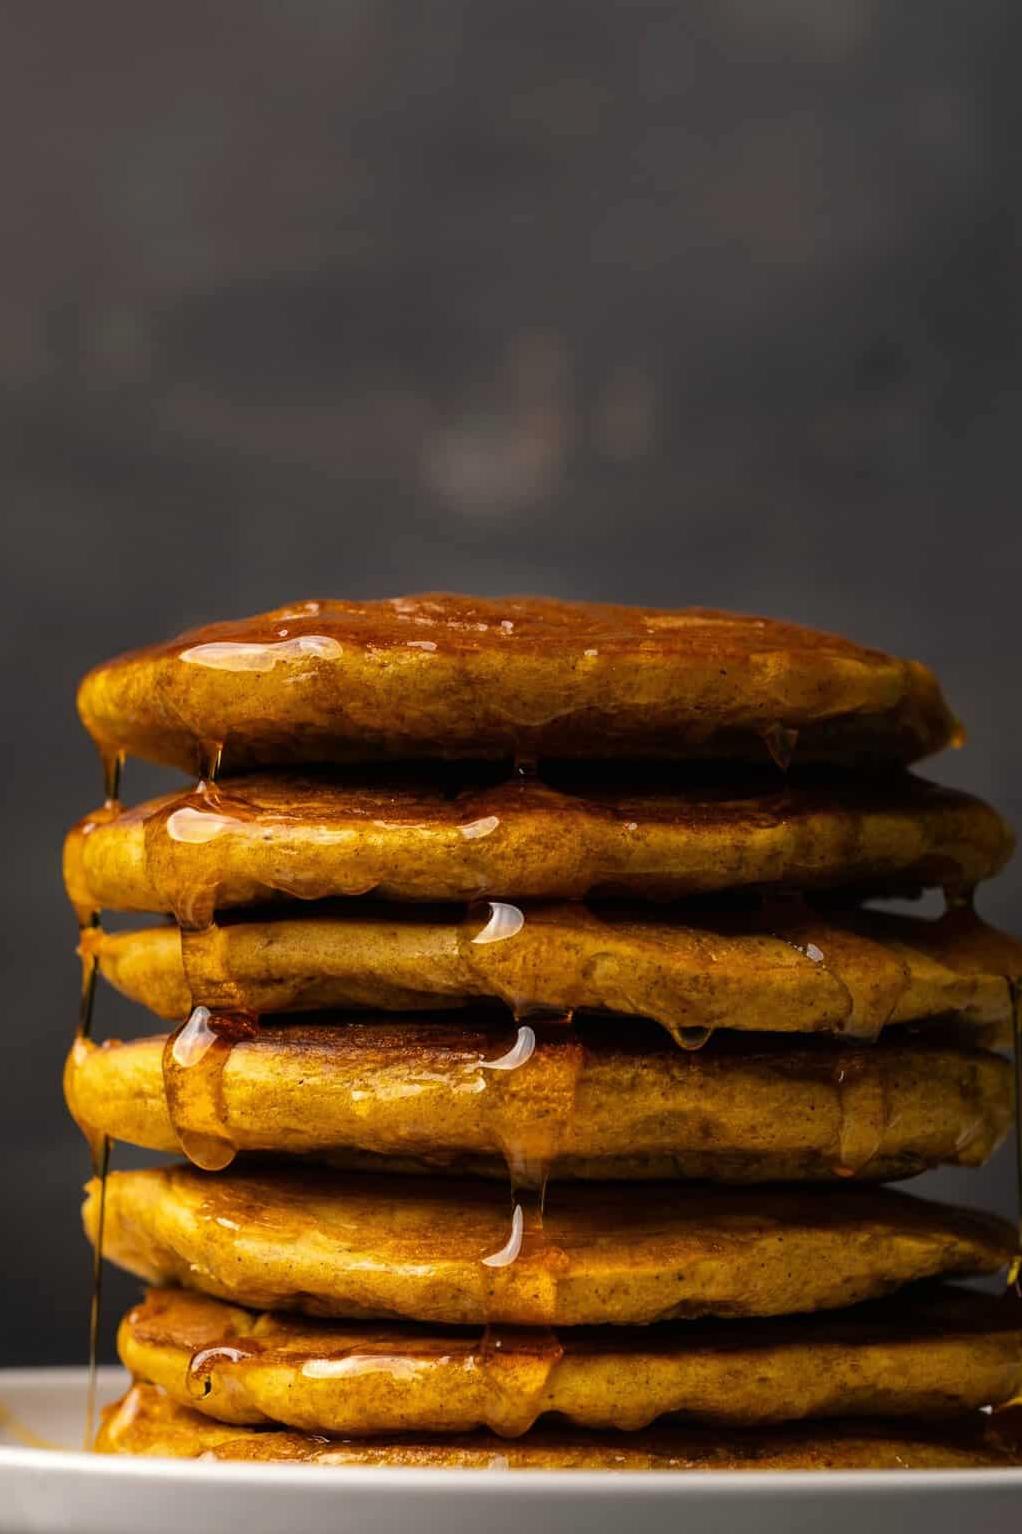  These vegan pancakes are bursting with pumpkin flavor